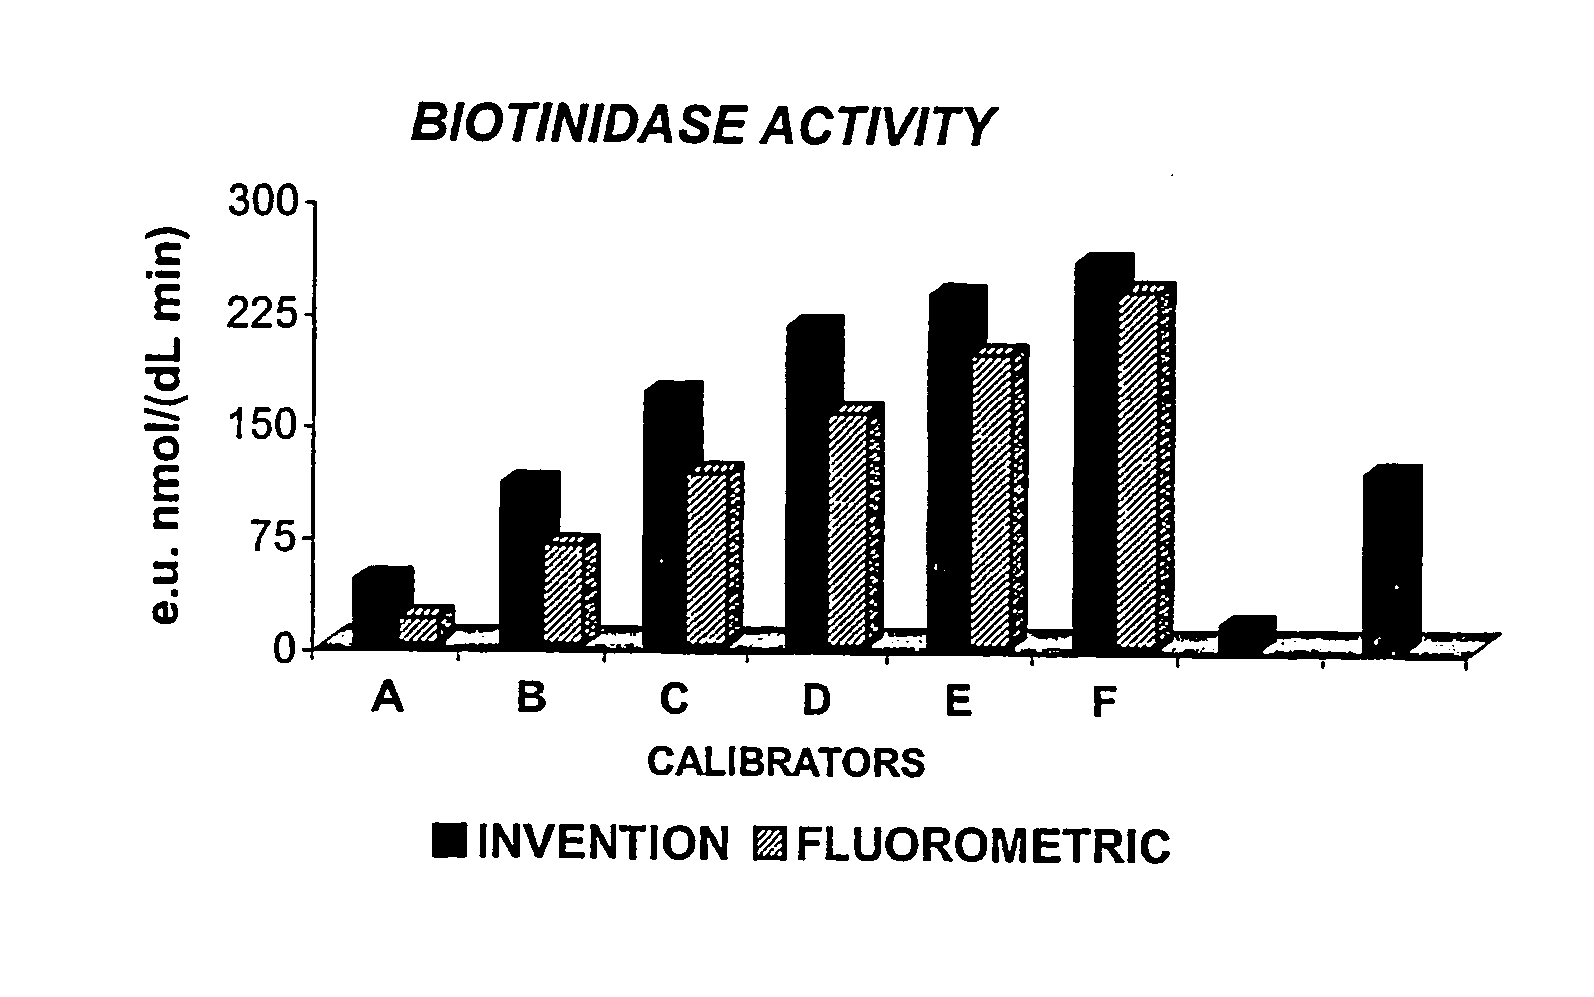 Mass spectrometry methods for simultaneous detection of metabolic enzyme activity and metabolite levels